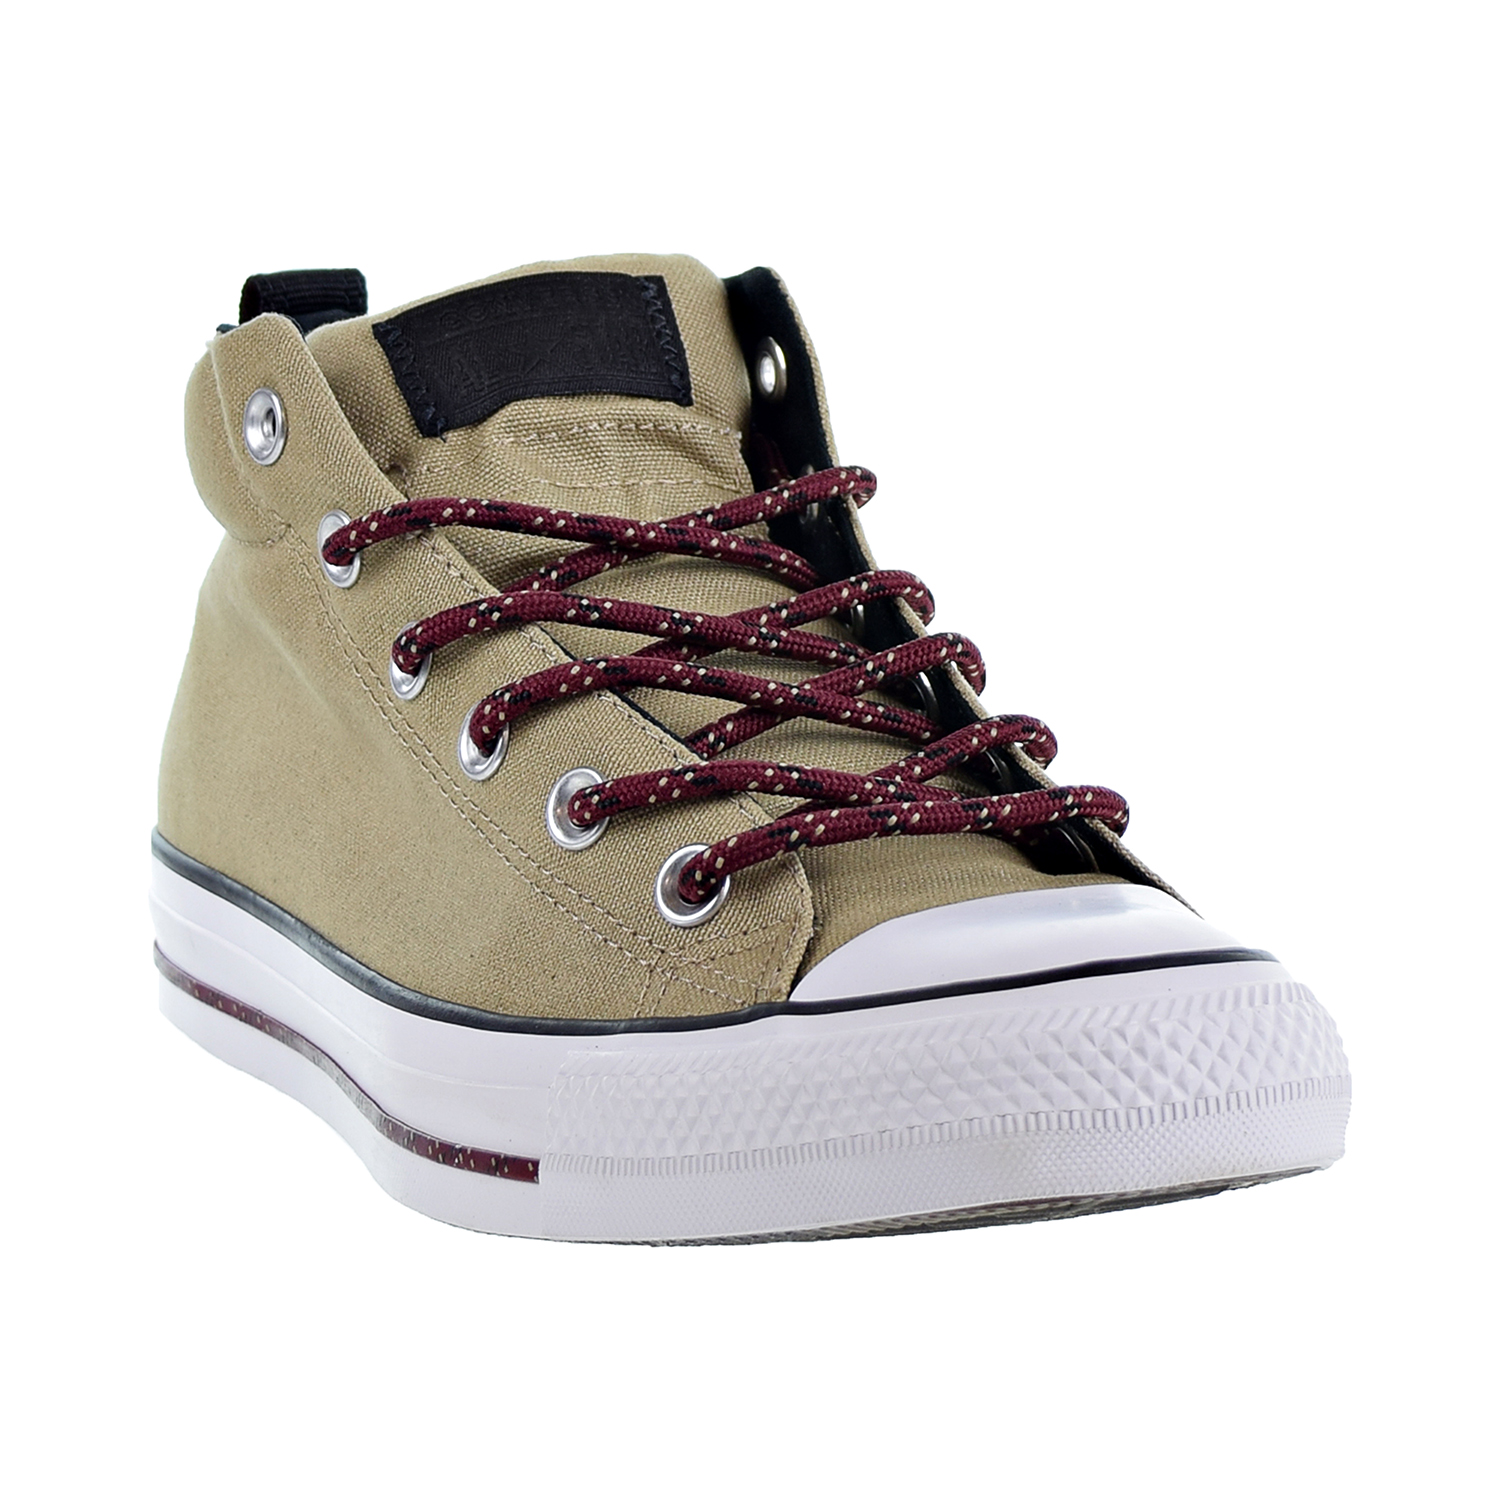 Converse Chuck Taylor All Star Street Mid Unisex Shoes Khaki/Black/White 162383f - image 2 of 6